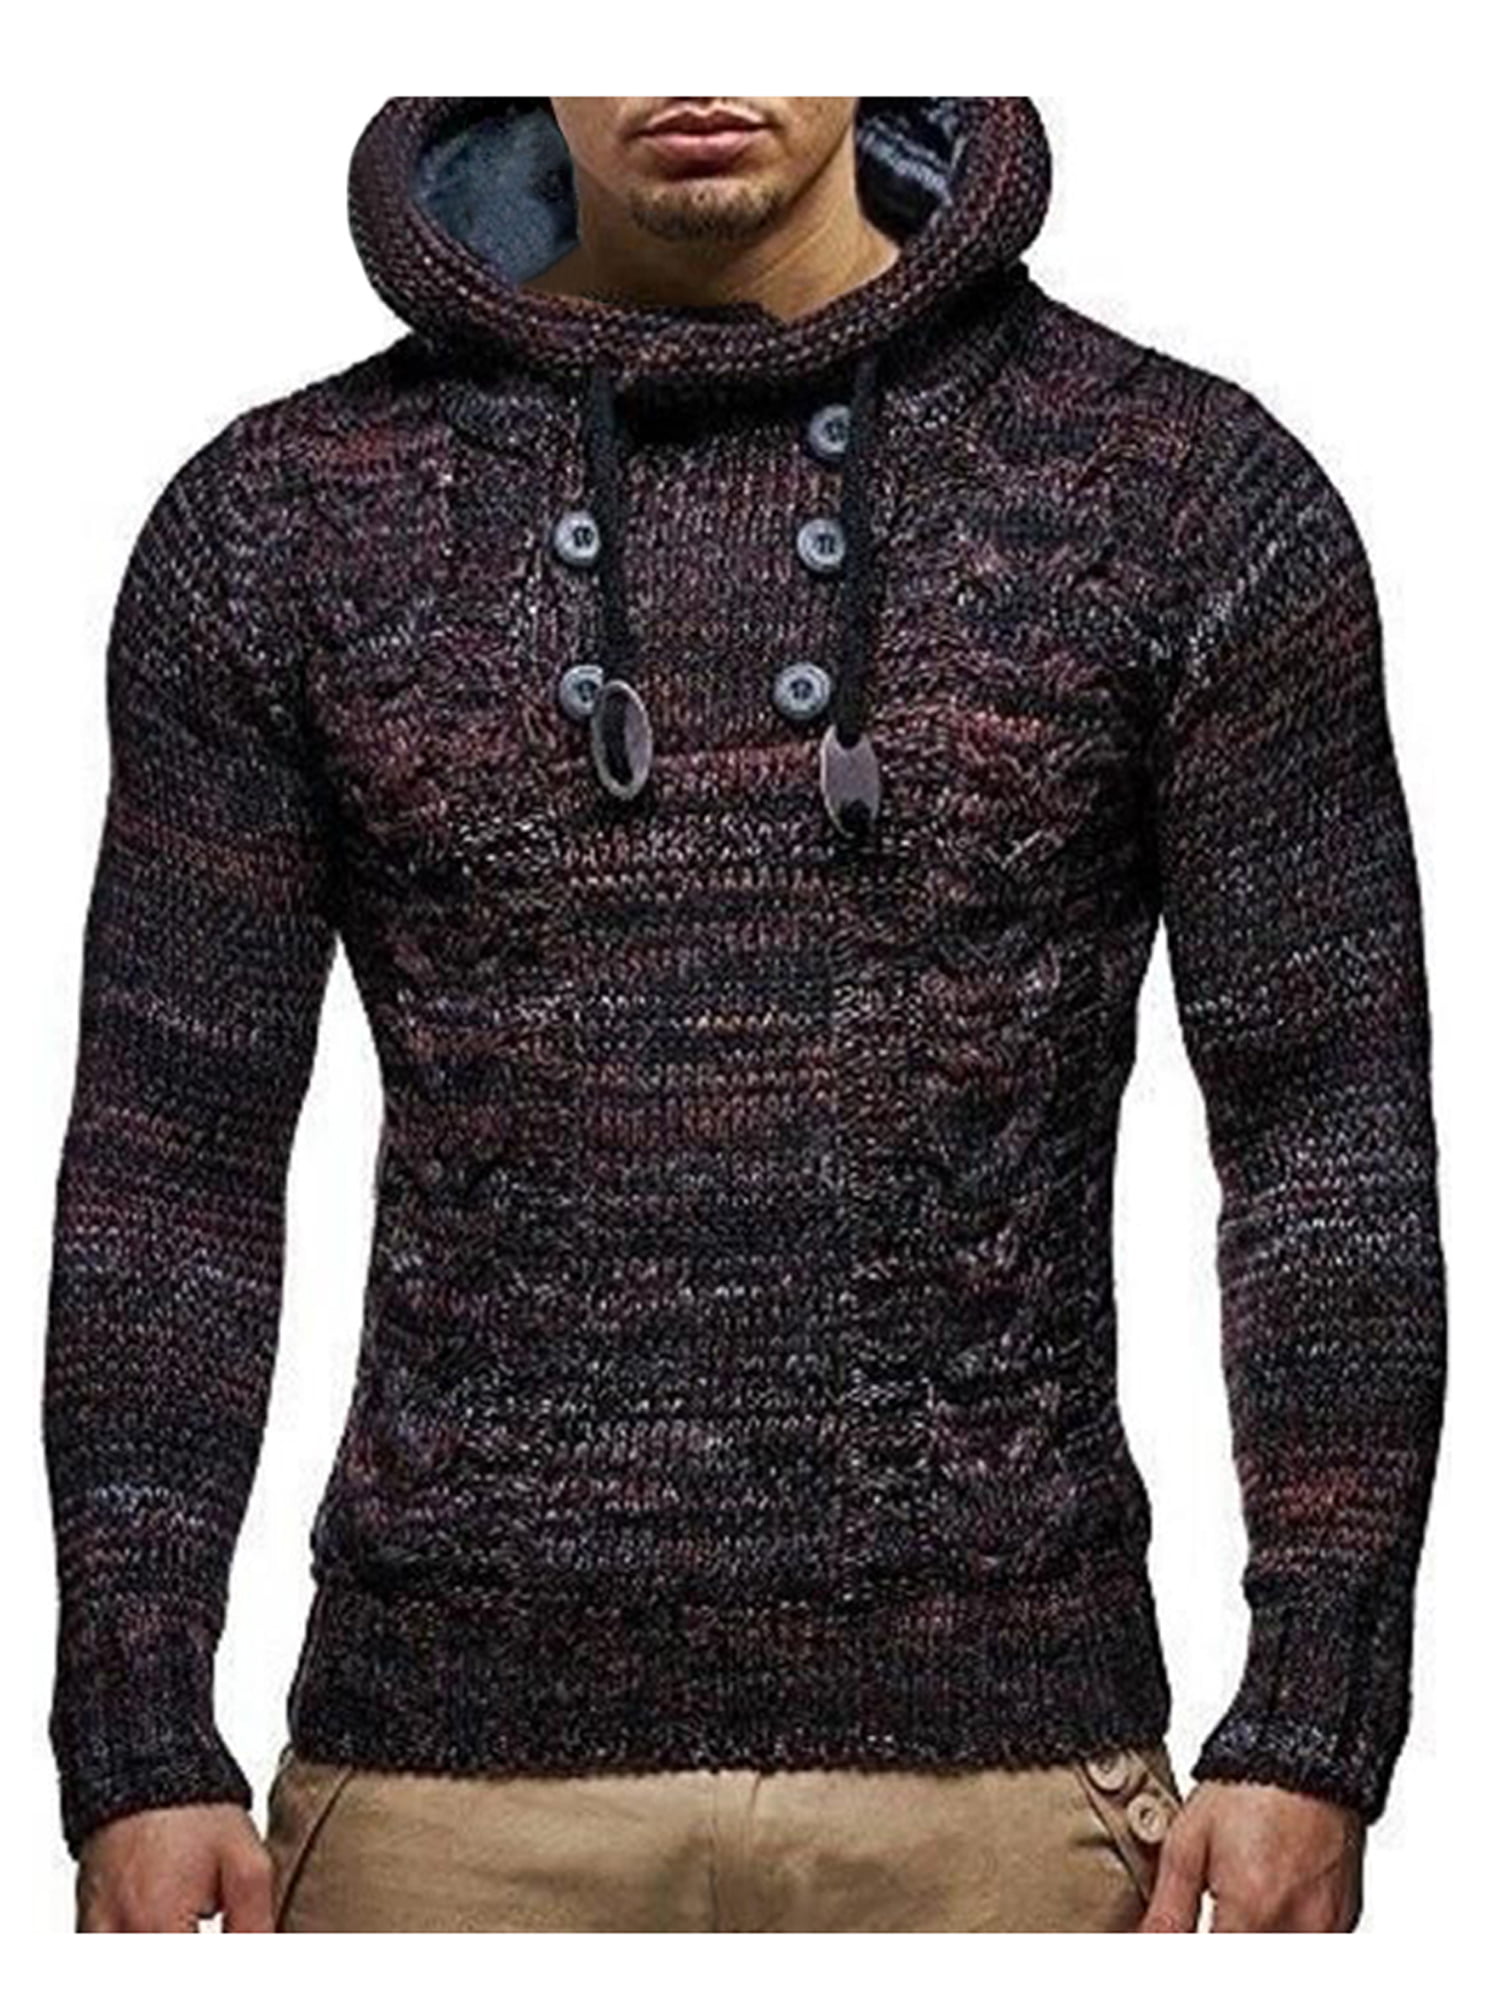 Mens Long Sleeve Knitwear Jumper Zip Up High Neck Sweater Knit Stretchy Pullover 